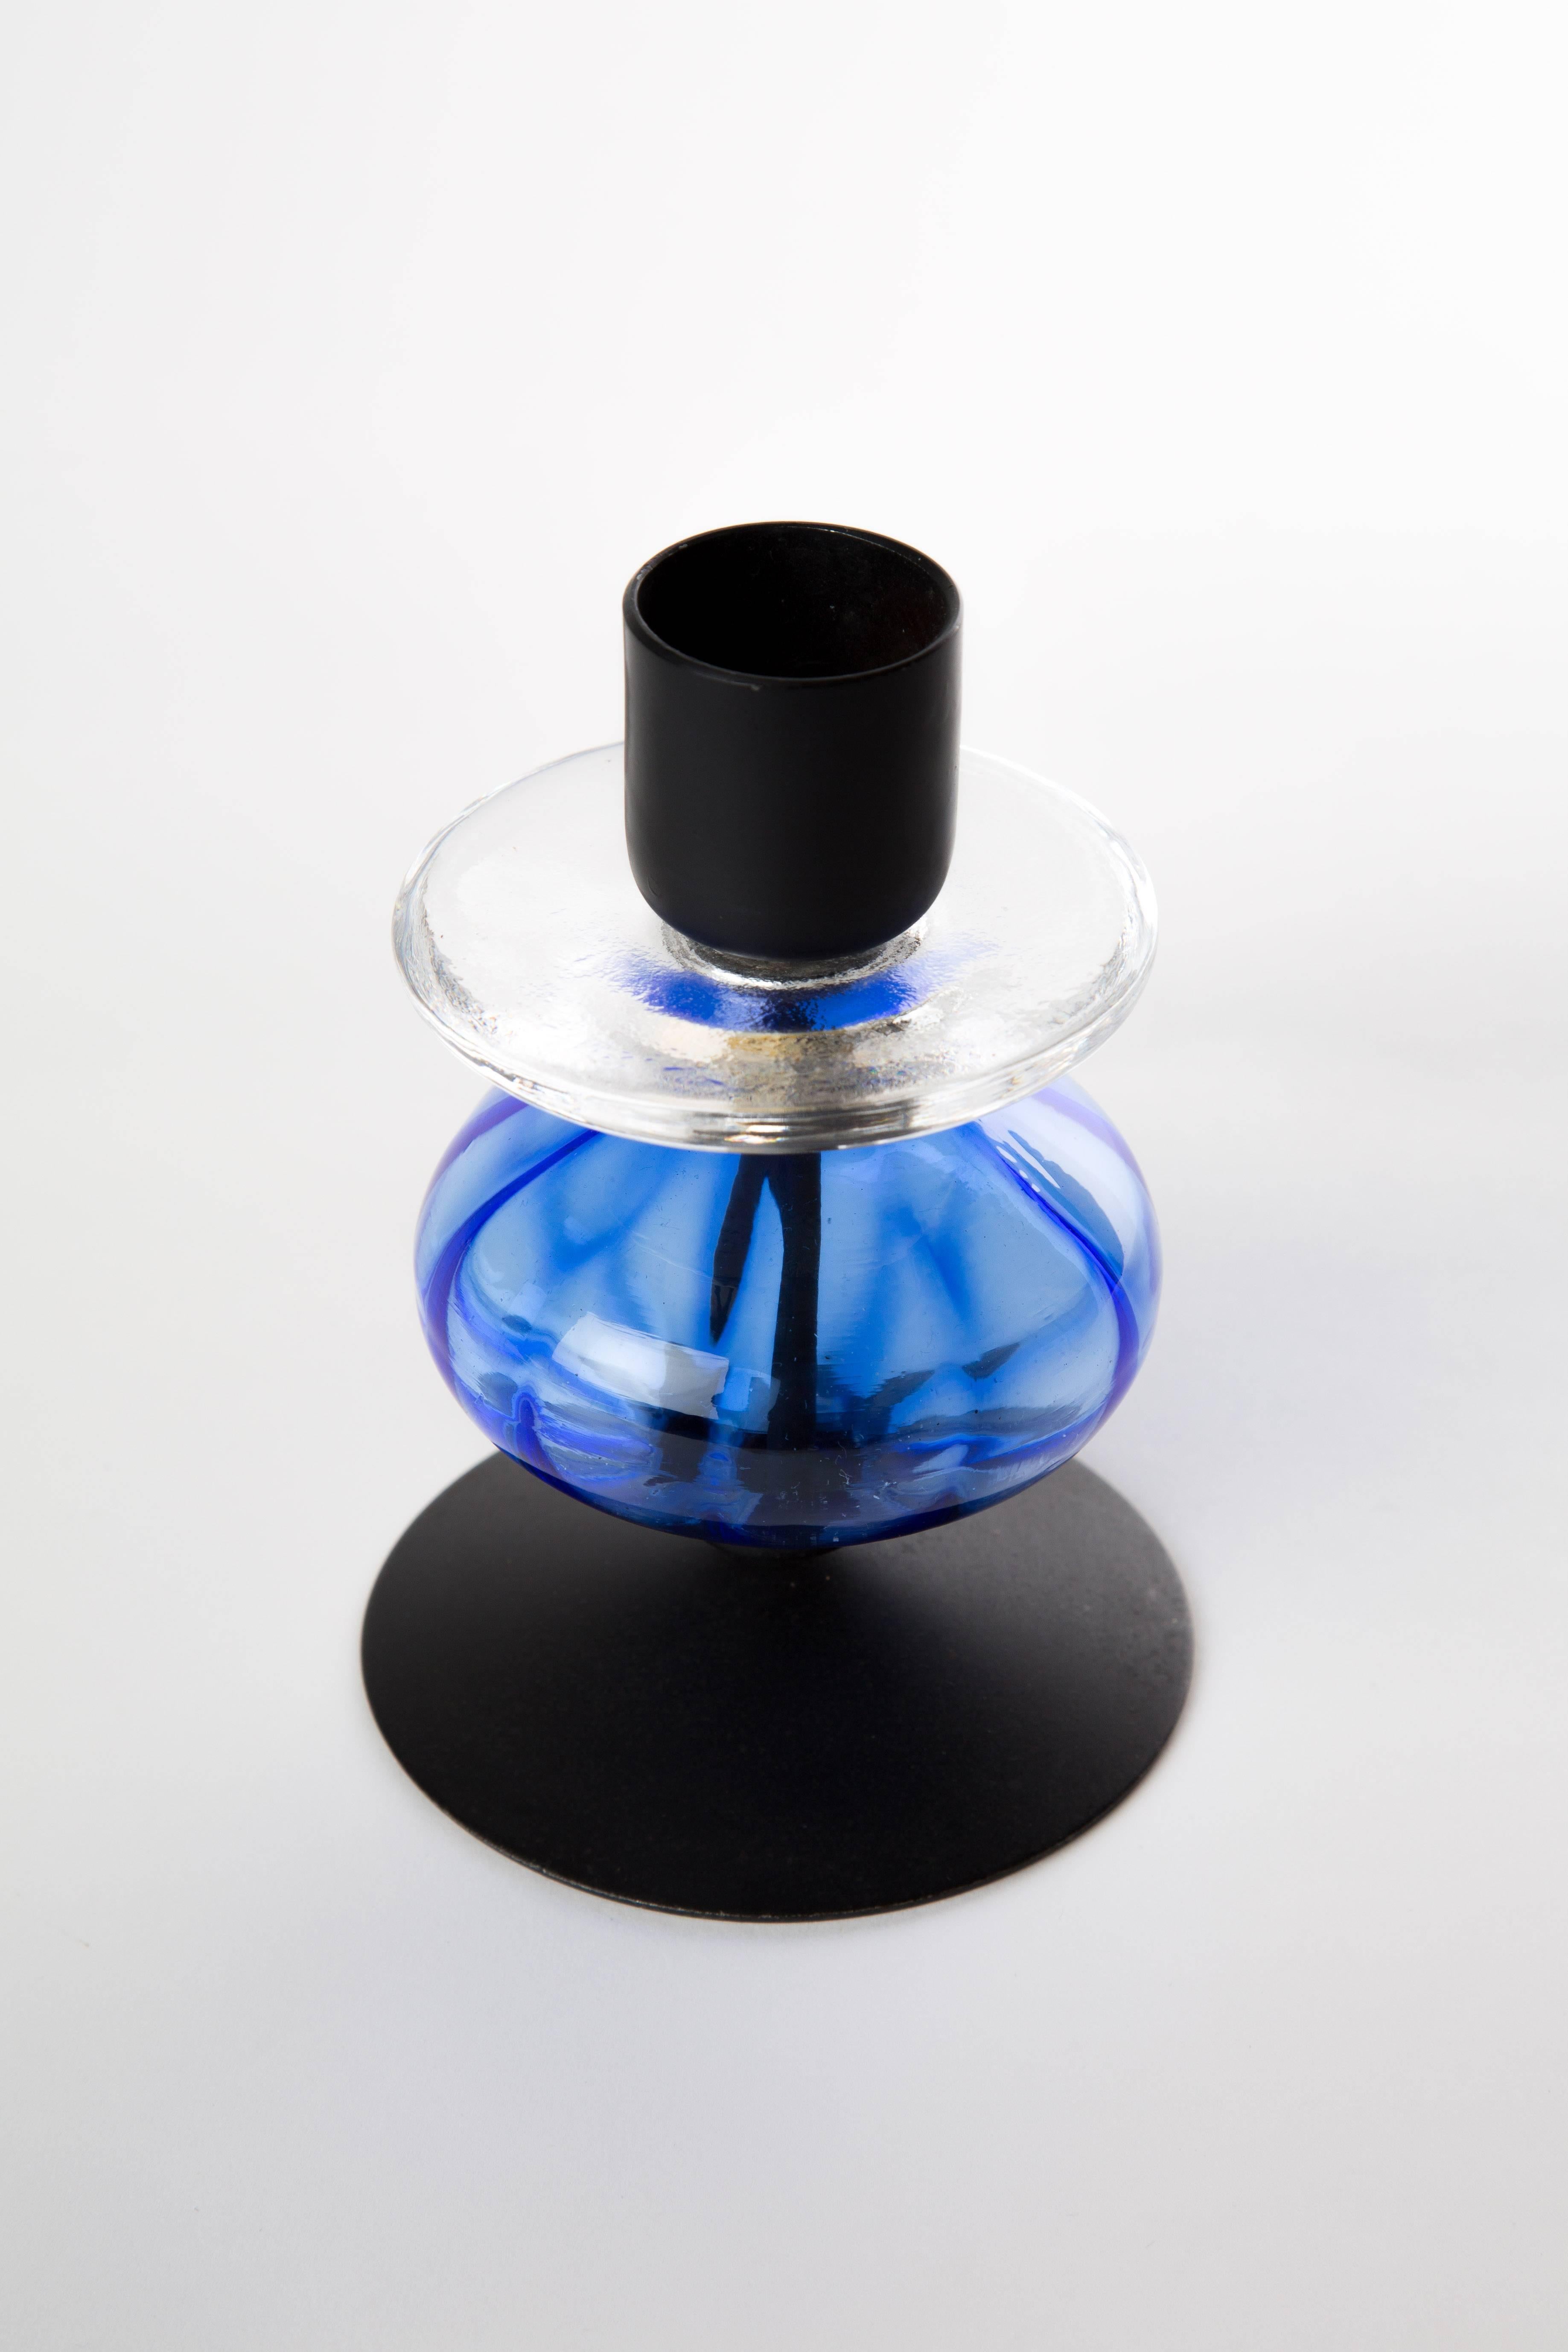 ERIK HOGLUND CANDLEHOLDER with blue transparent artglass. The combination with the black metal is characteristic for Erik Hoglund. Marked with a sticker 